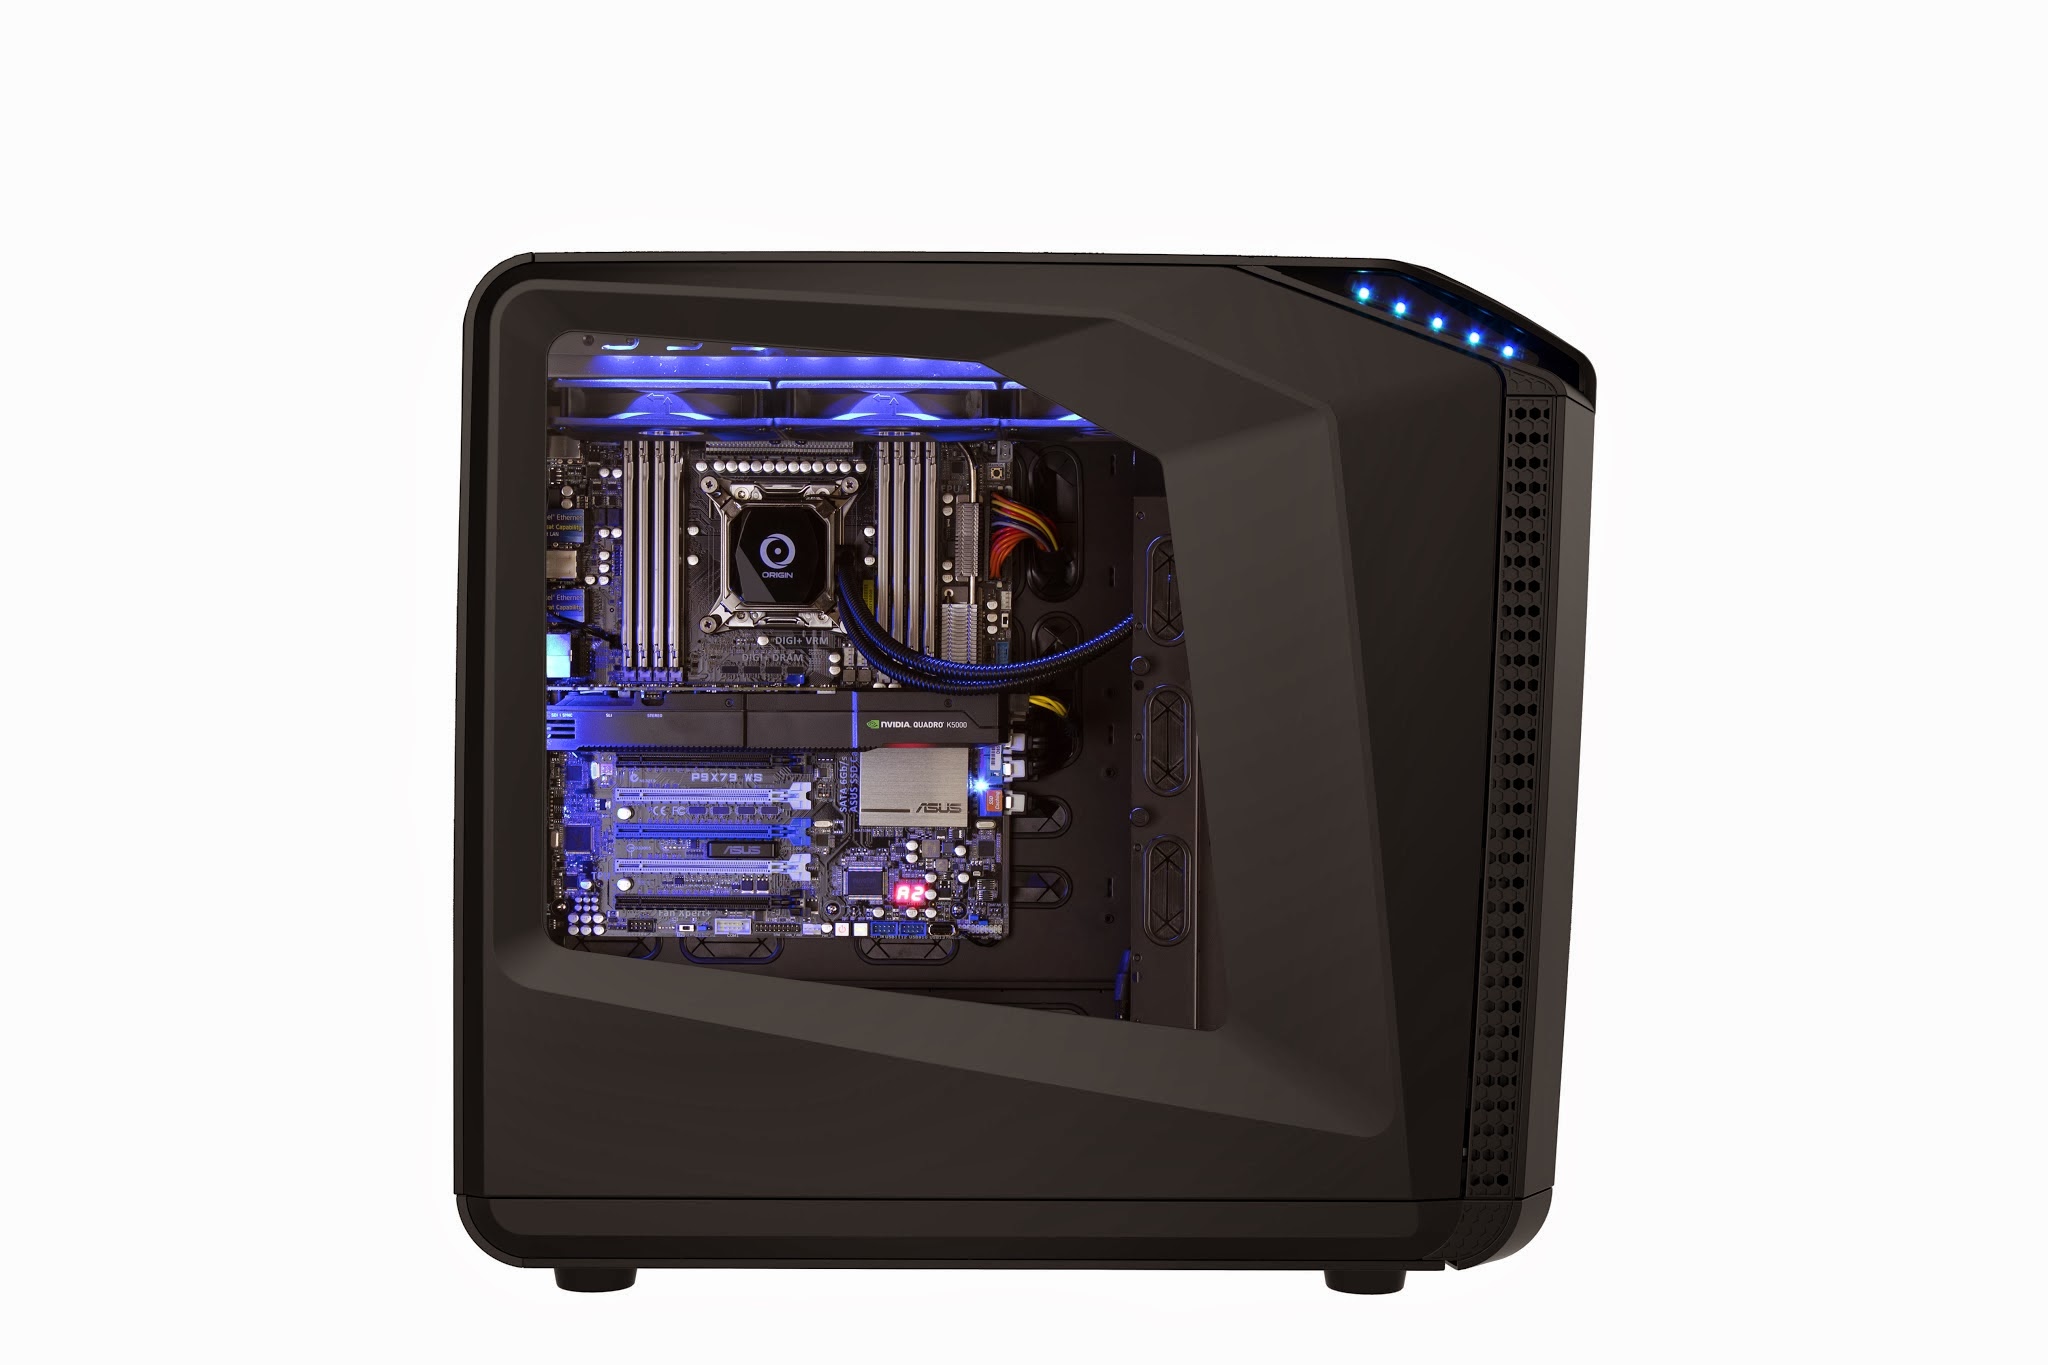 There Are Four Ways To Mount A Motherboard In This PC Case